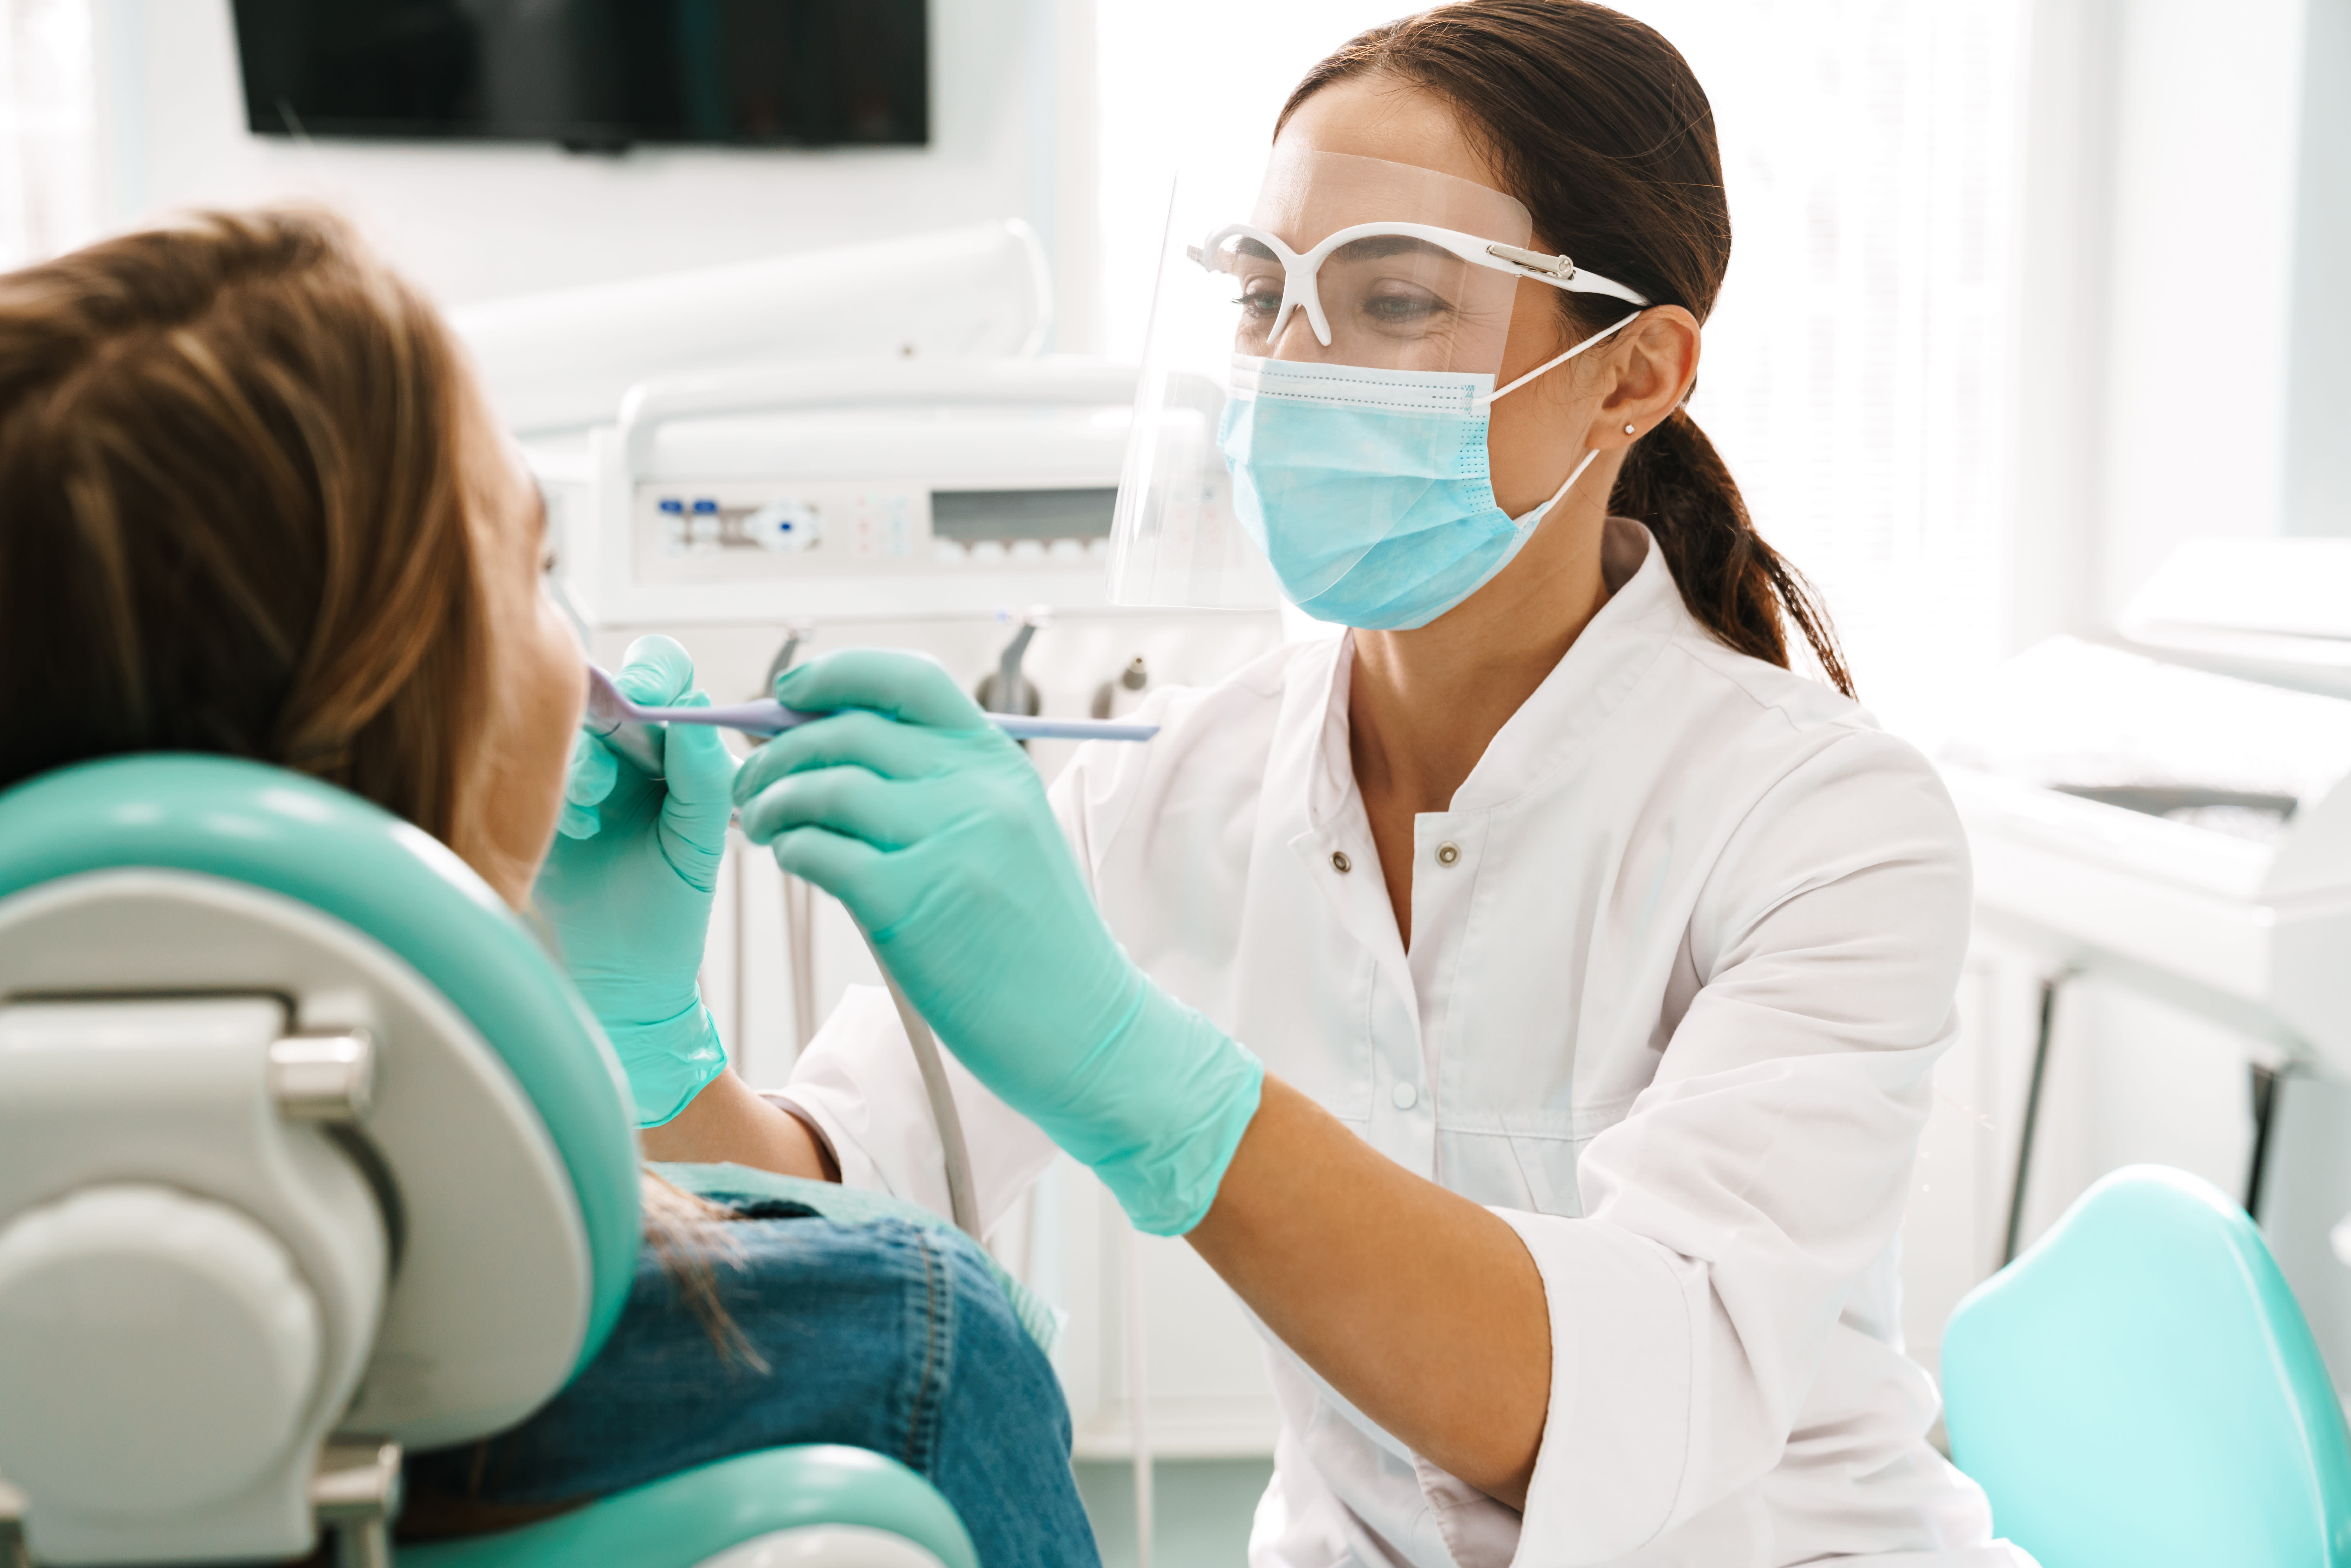 https://www.istockphoto.com/photo/shot-of-a-patient-and-assistant-interacting-in-a-dentist-office-gm1370641643-440146867?phrase=dentist%20associate